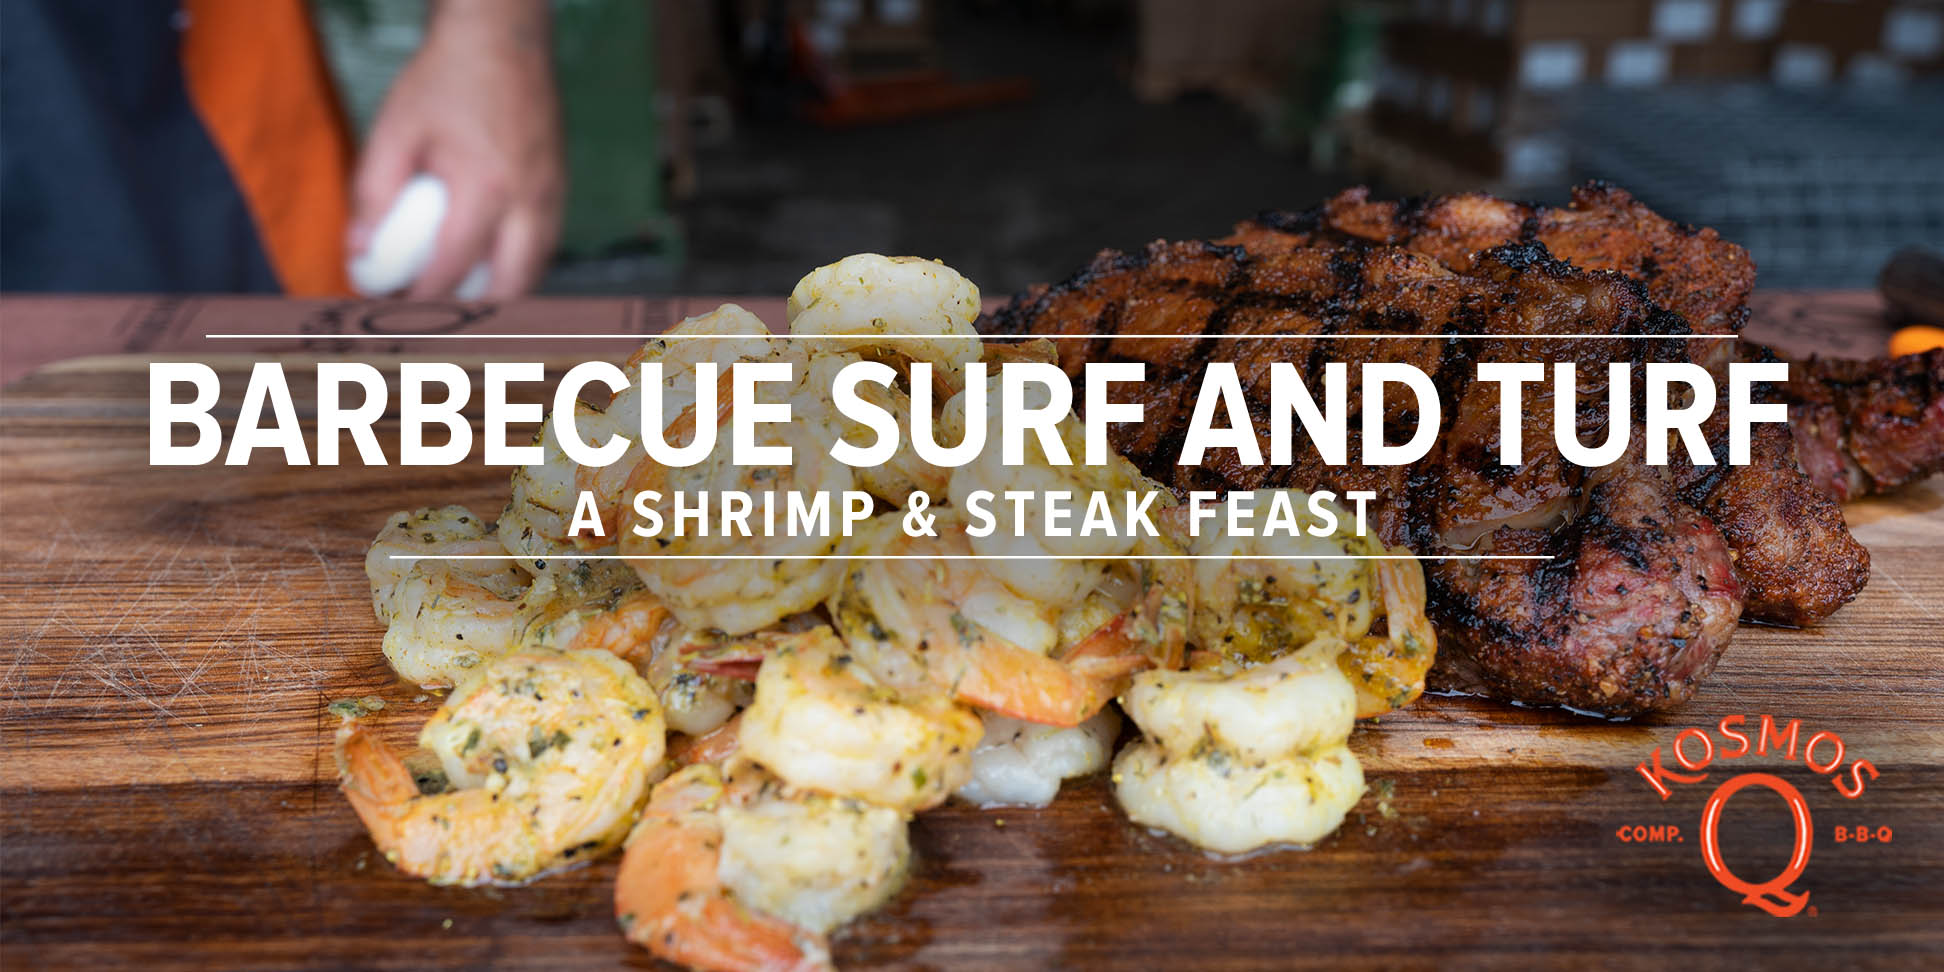 Barbecue Surf And Turf | Shrimp & Steak